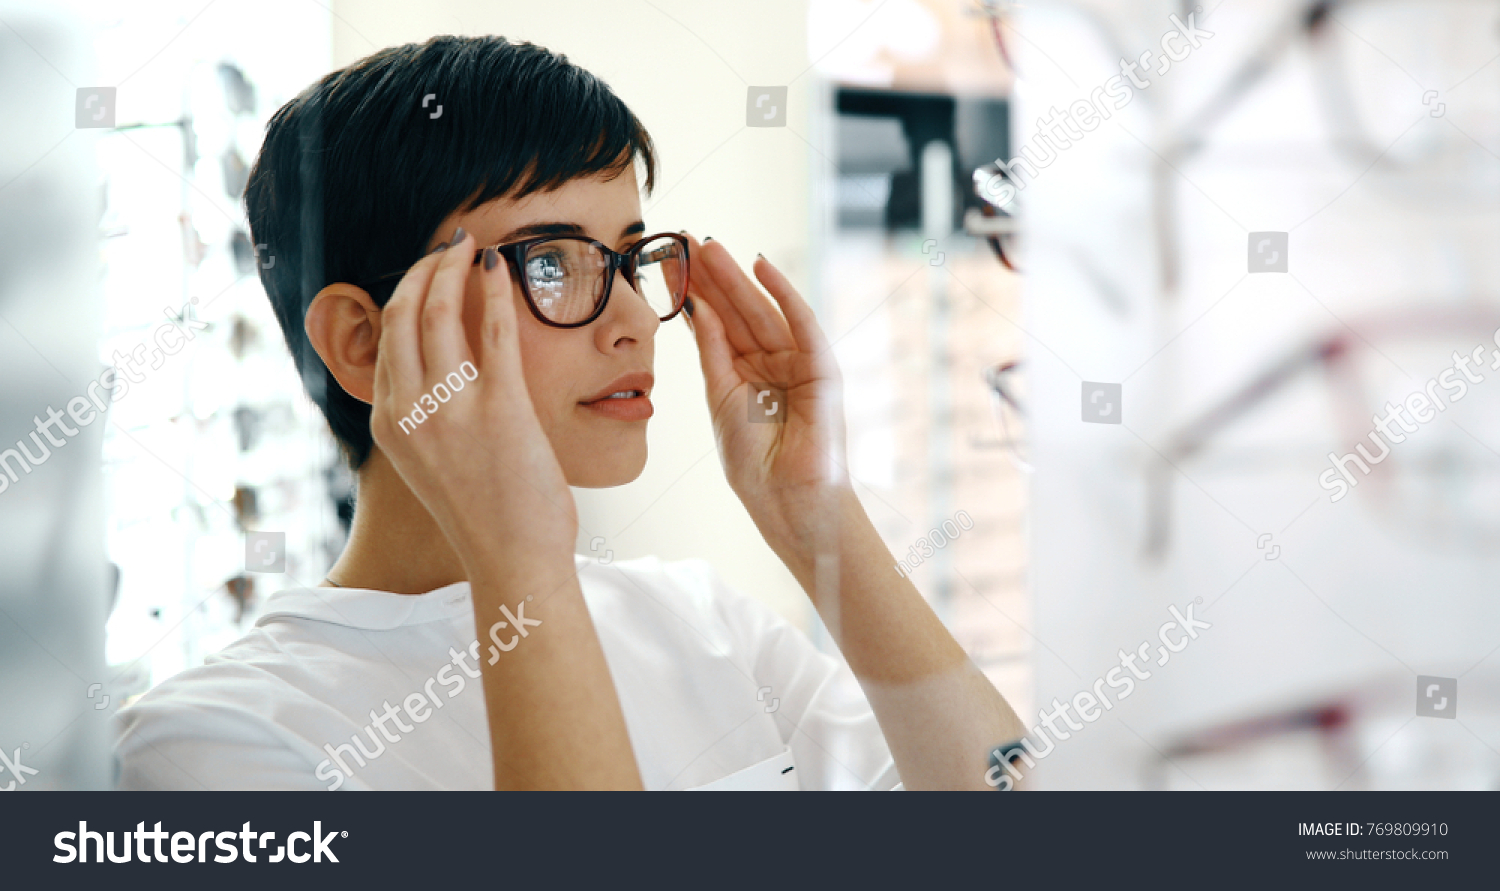 health care, eyesight and vision concept - happy woman choosing glasses at optics store #769809910